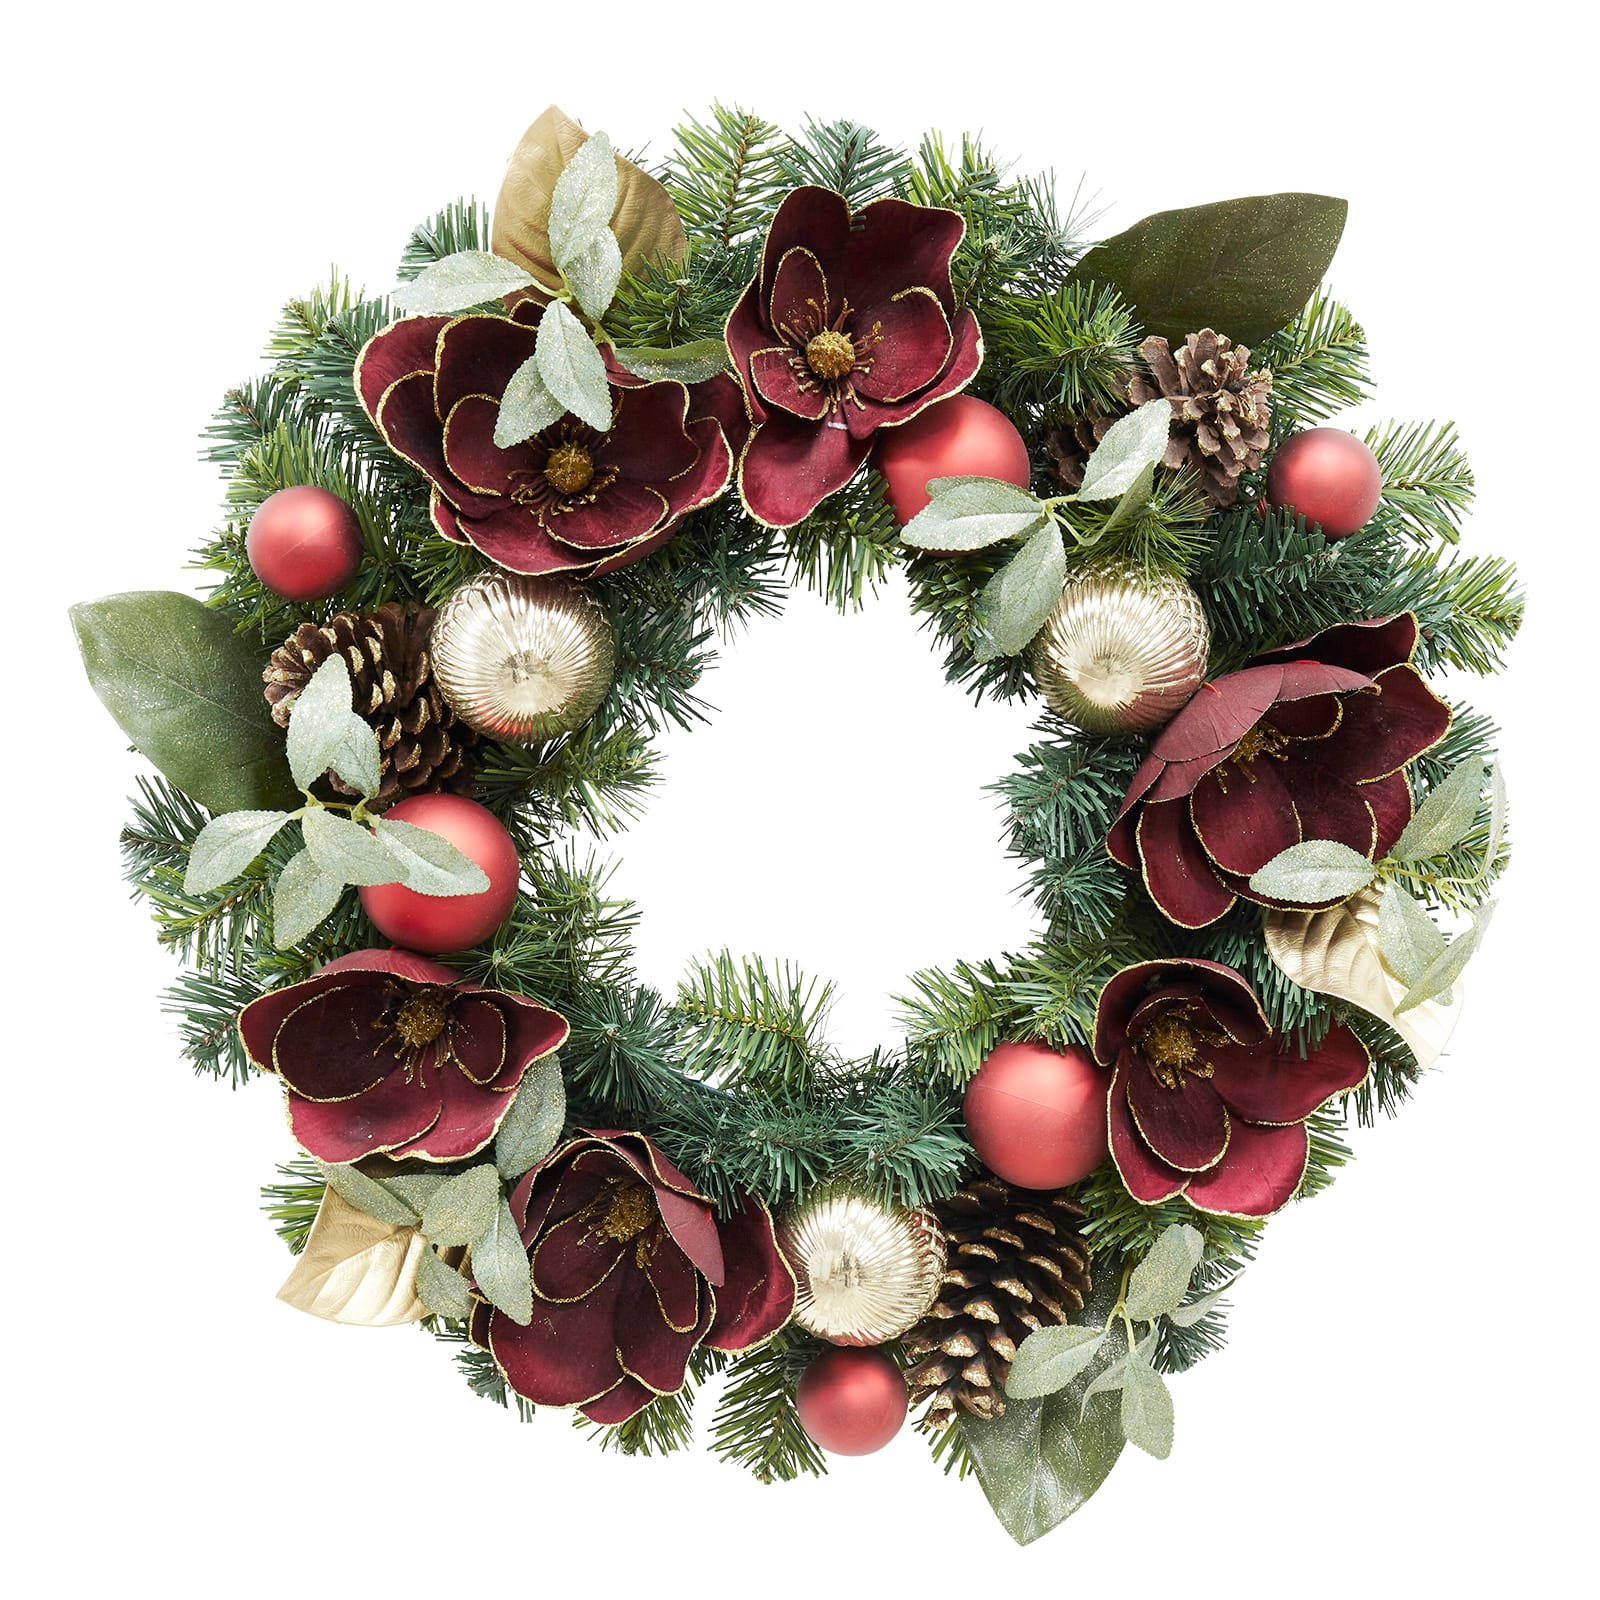 24 Christmas Wreath with Red & White Ornaments